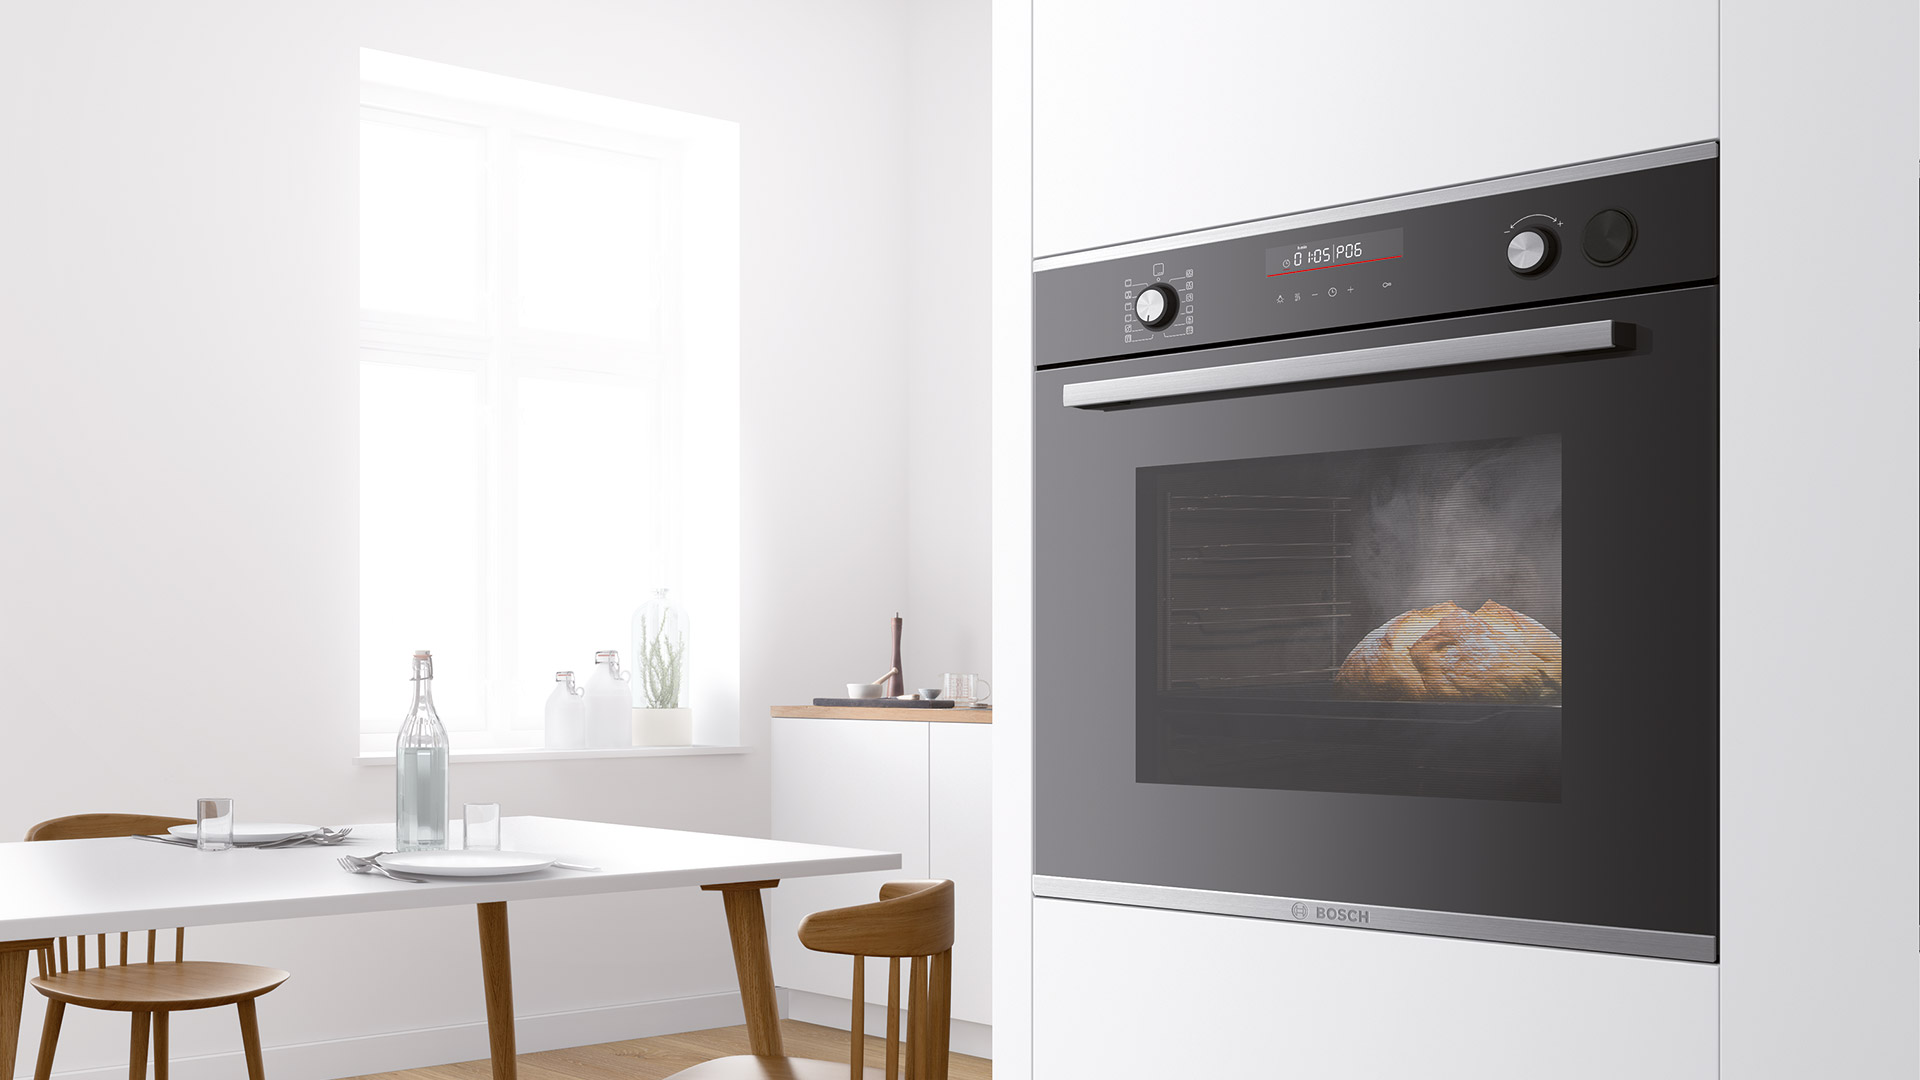 A secret ingredient for your recipes? The Bosch Series 6 ovens with steam impulses